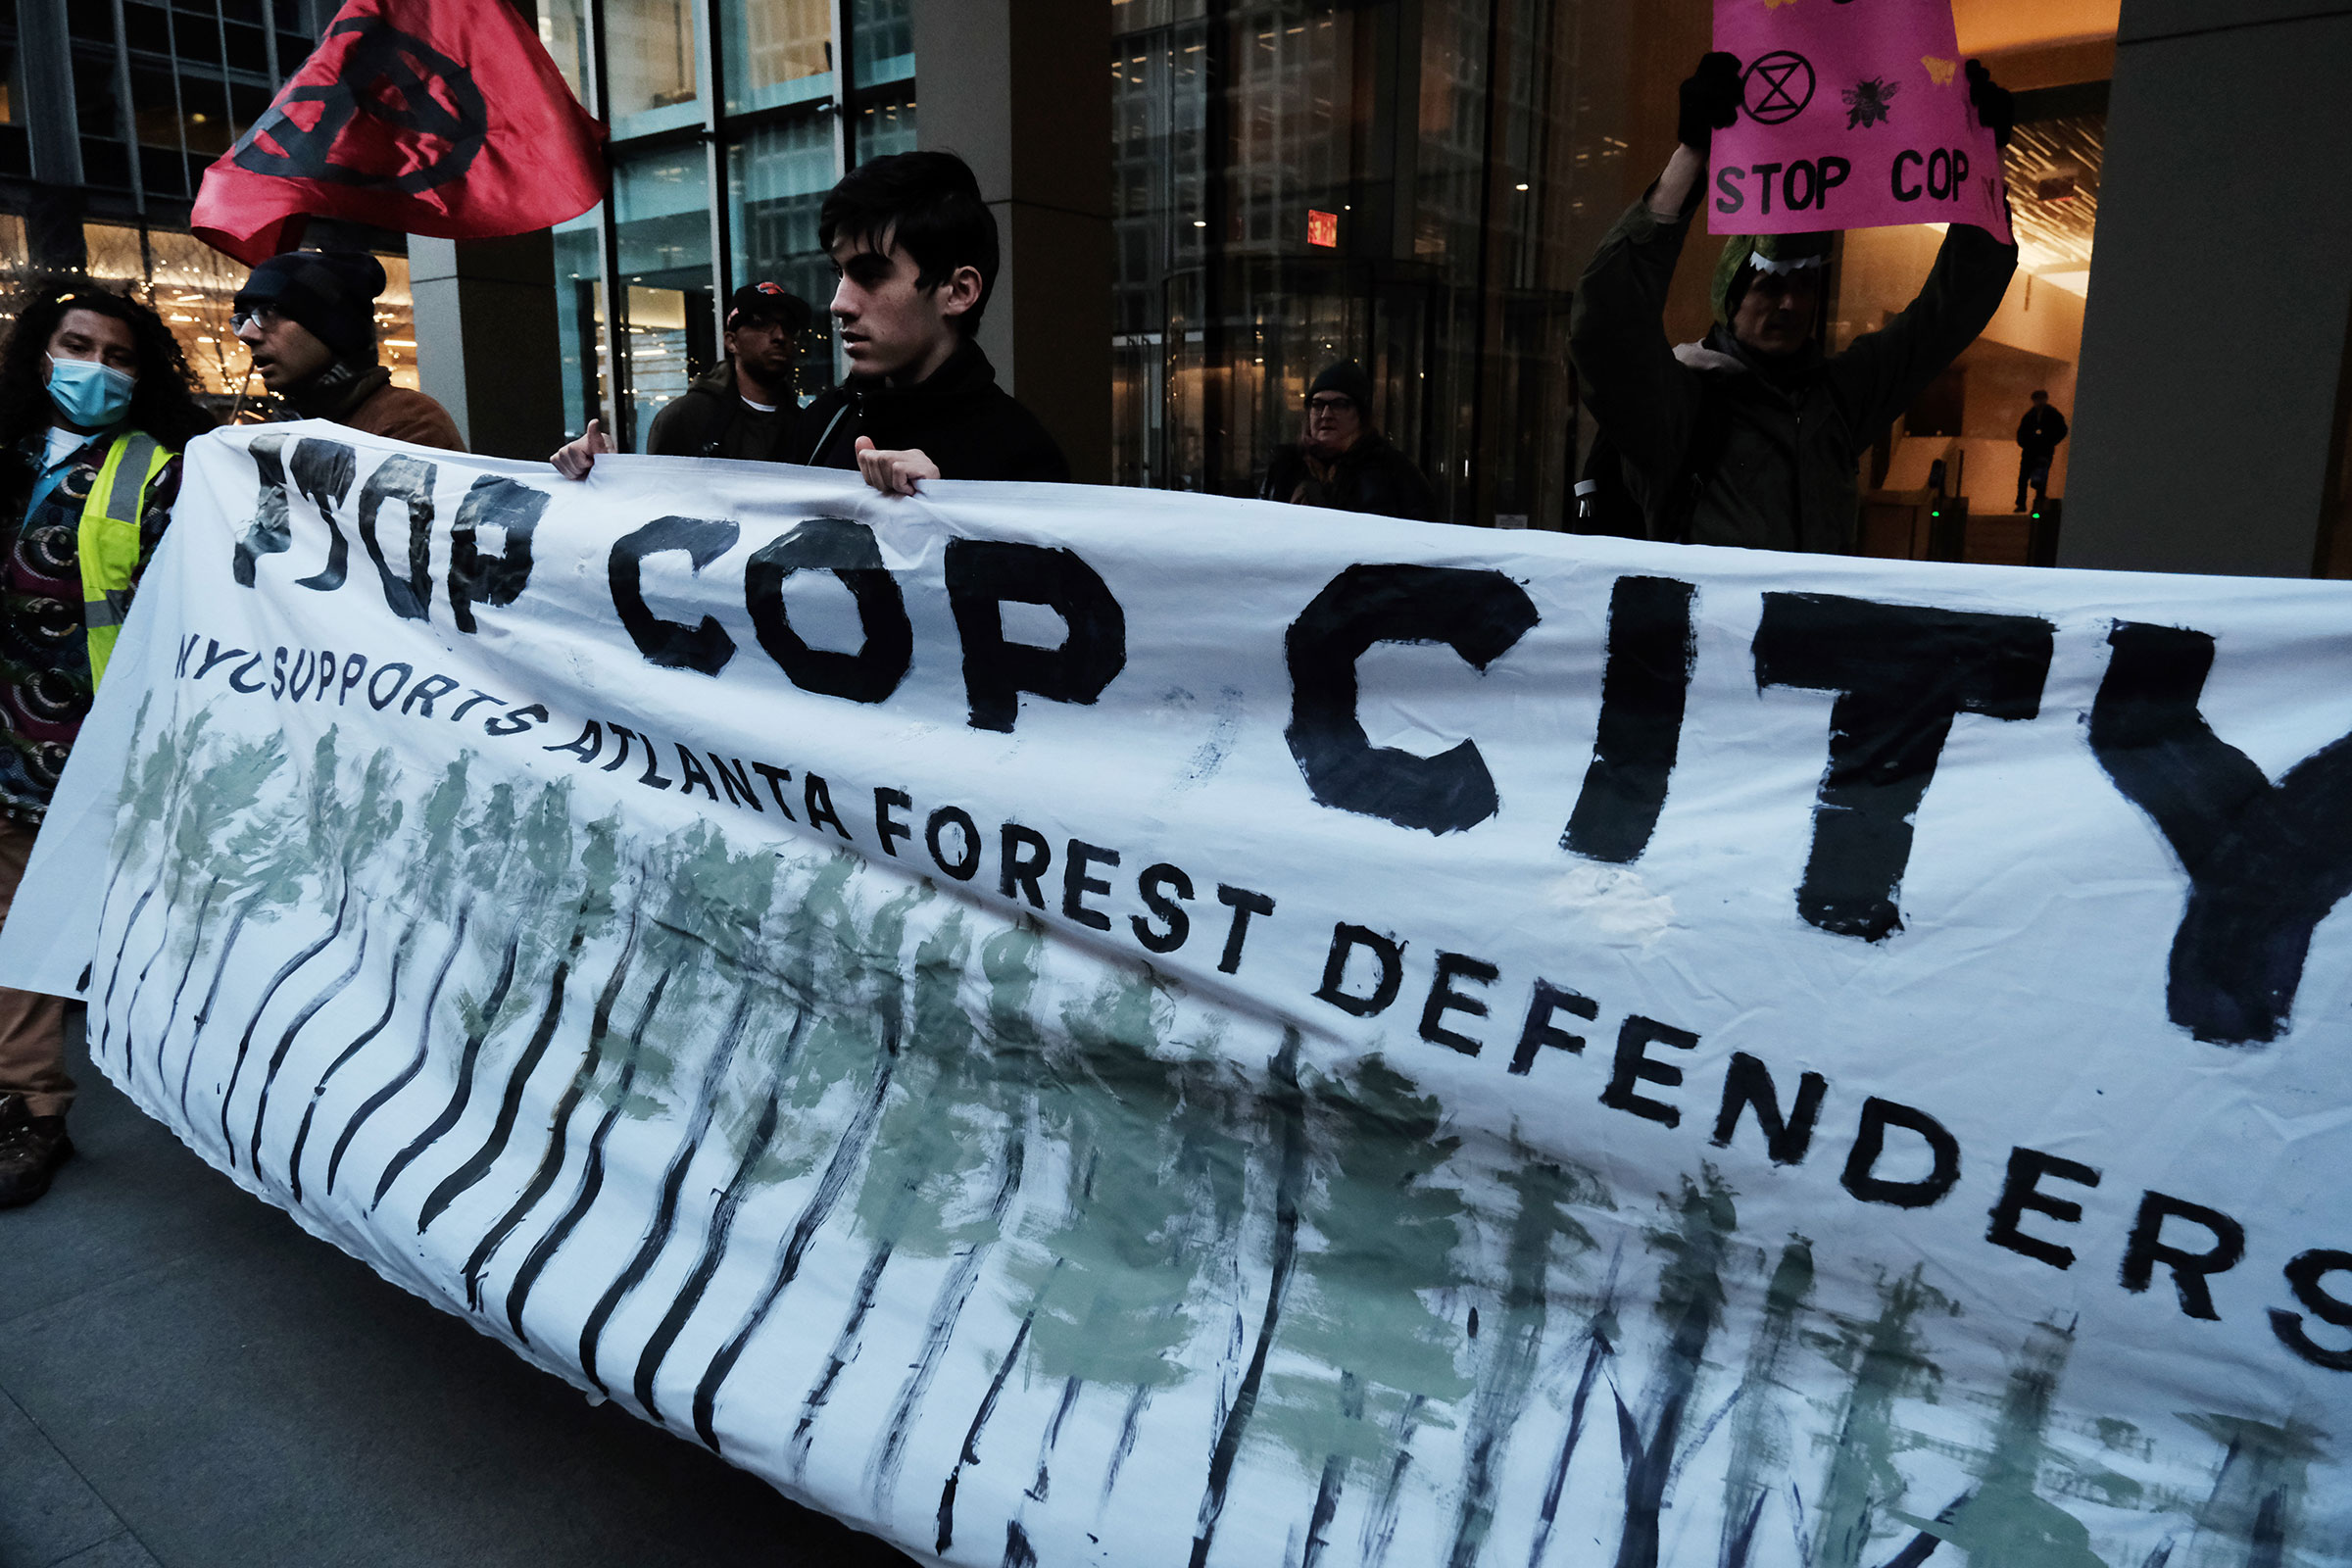 People stand behind a banner reading "STOP COP CITY; NYC SUPPORTS ATLANTA FOREST DEFENDERS" during an outdoor protest